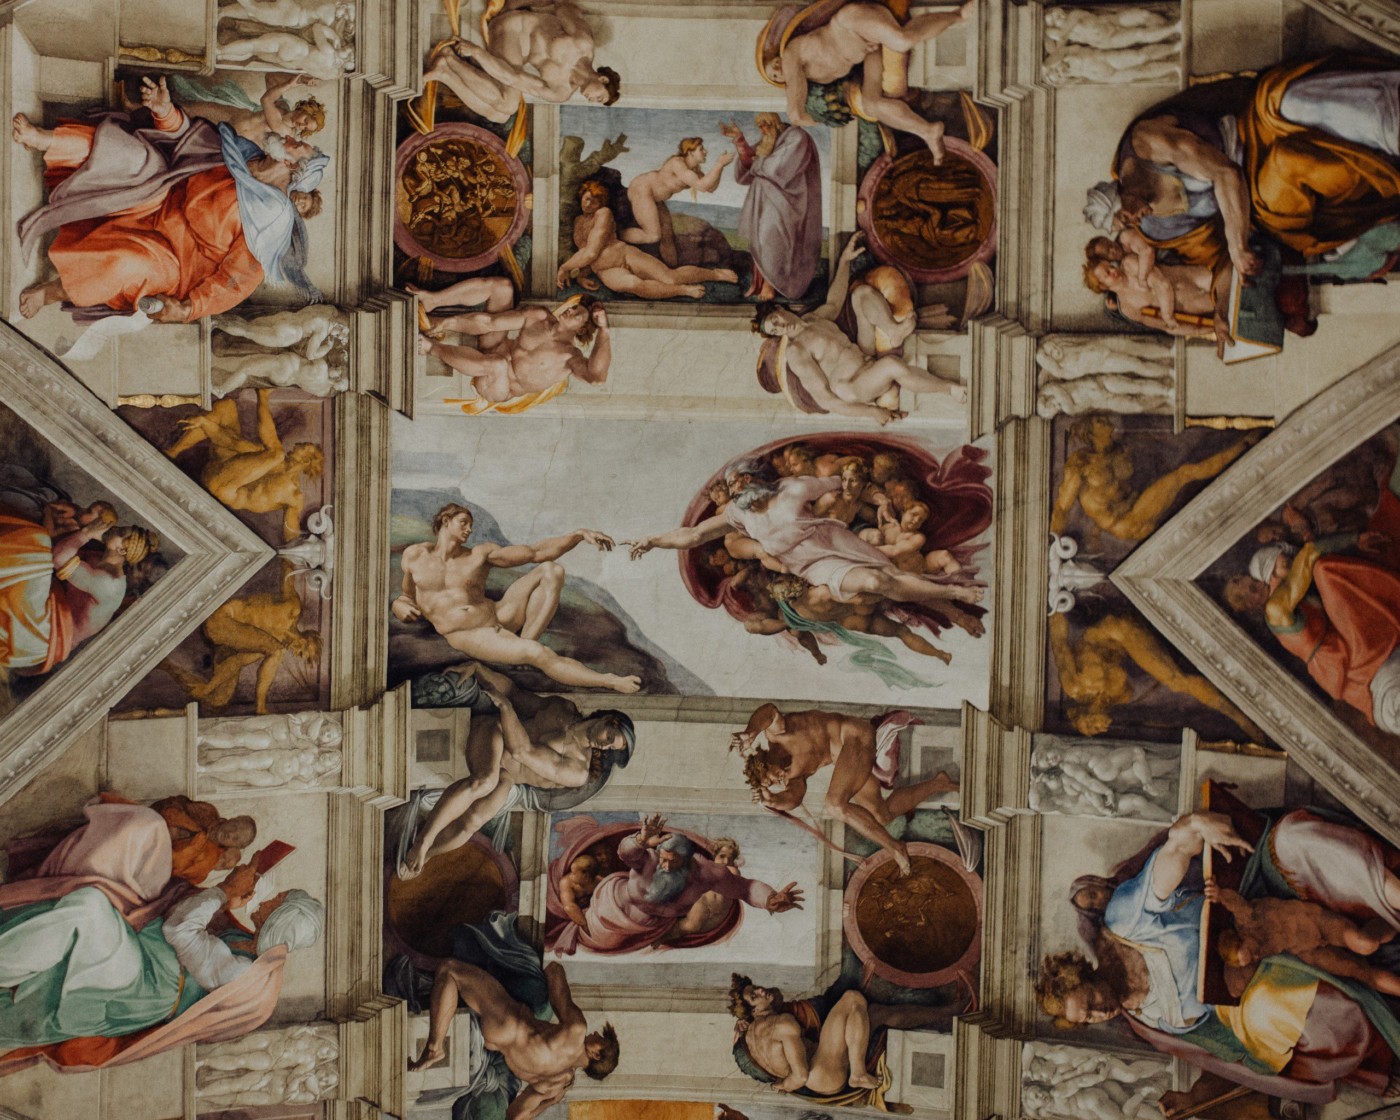 Sistine Chapel is one of Italy's most popular tourist destinations